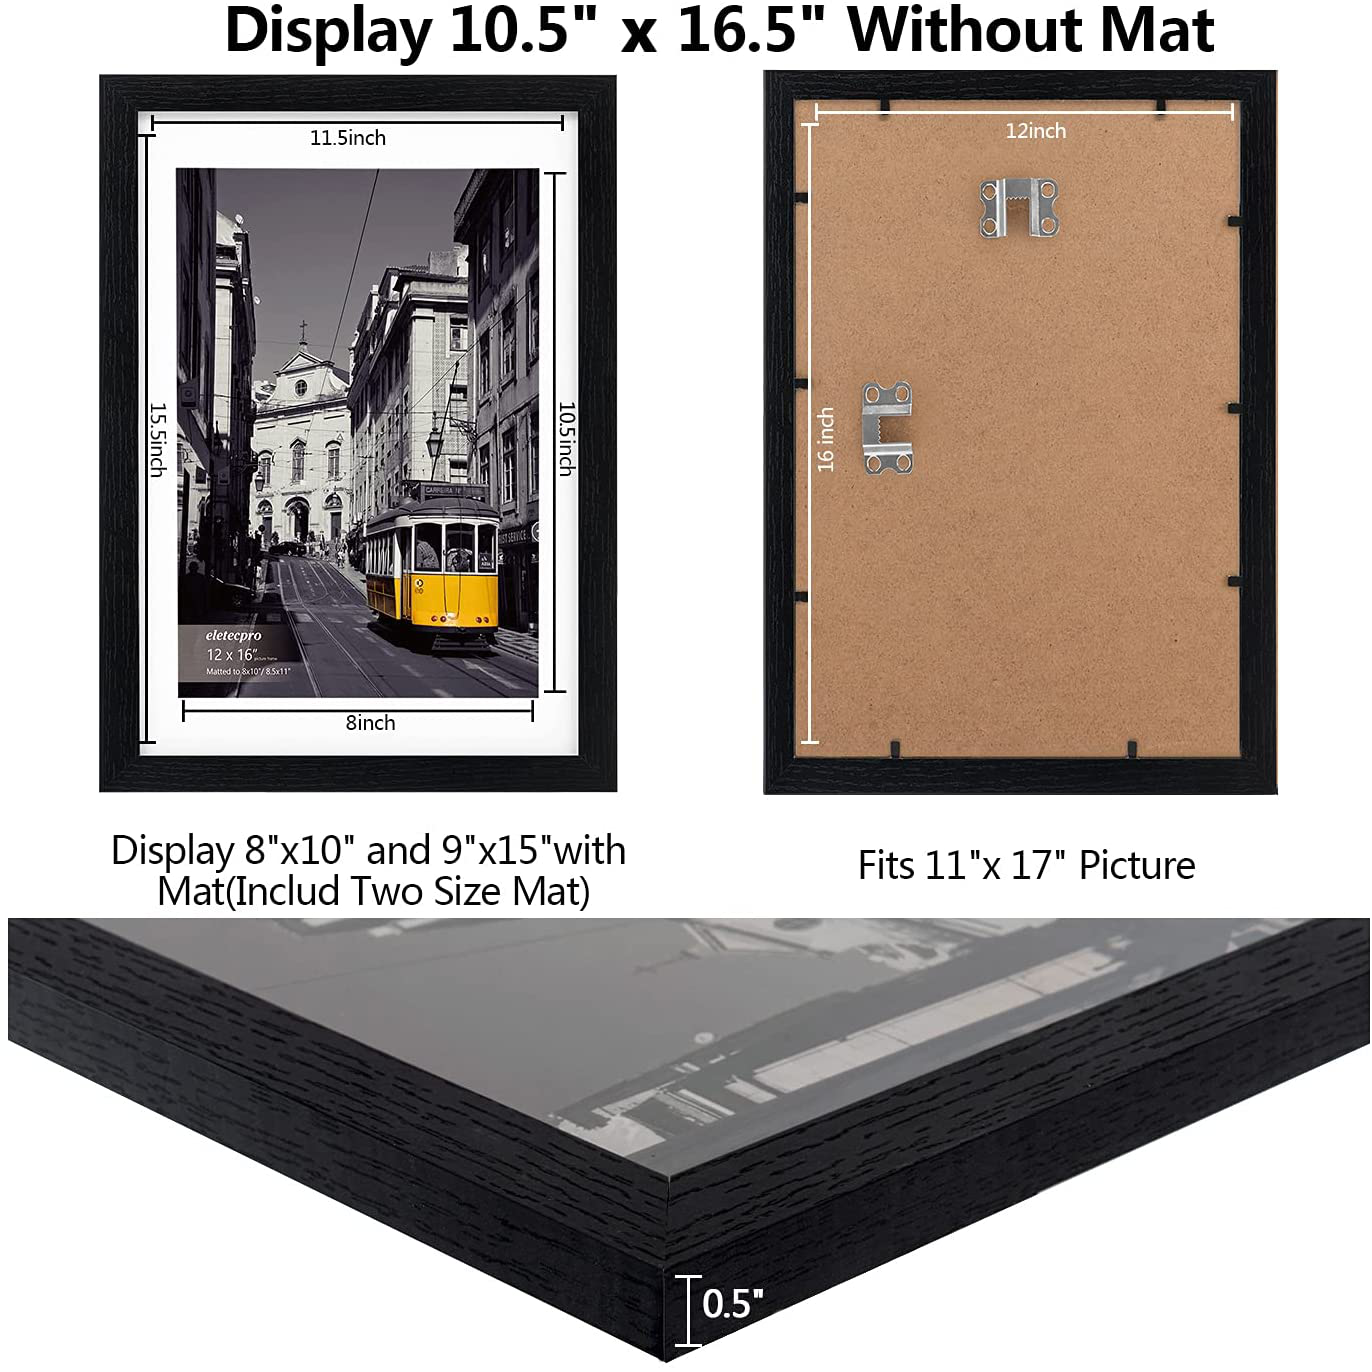 eletecpro 11X14 Picture Frames Set of 5,Display 8x10 or 8.5x11 Photo Frame with Mat or 11x14 Without Mat,Wall Gallery Photo Frames,Table Top Display or Wall Mounting